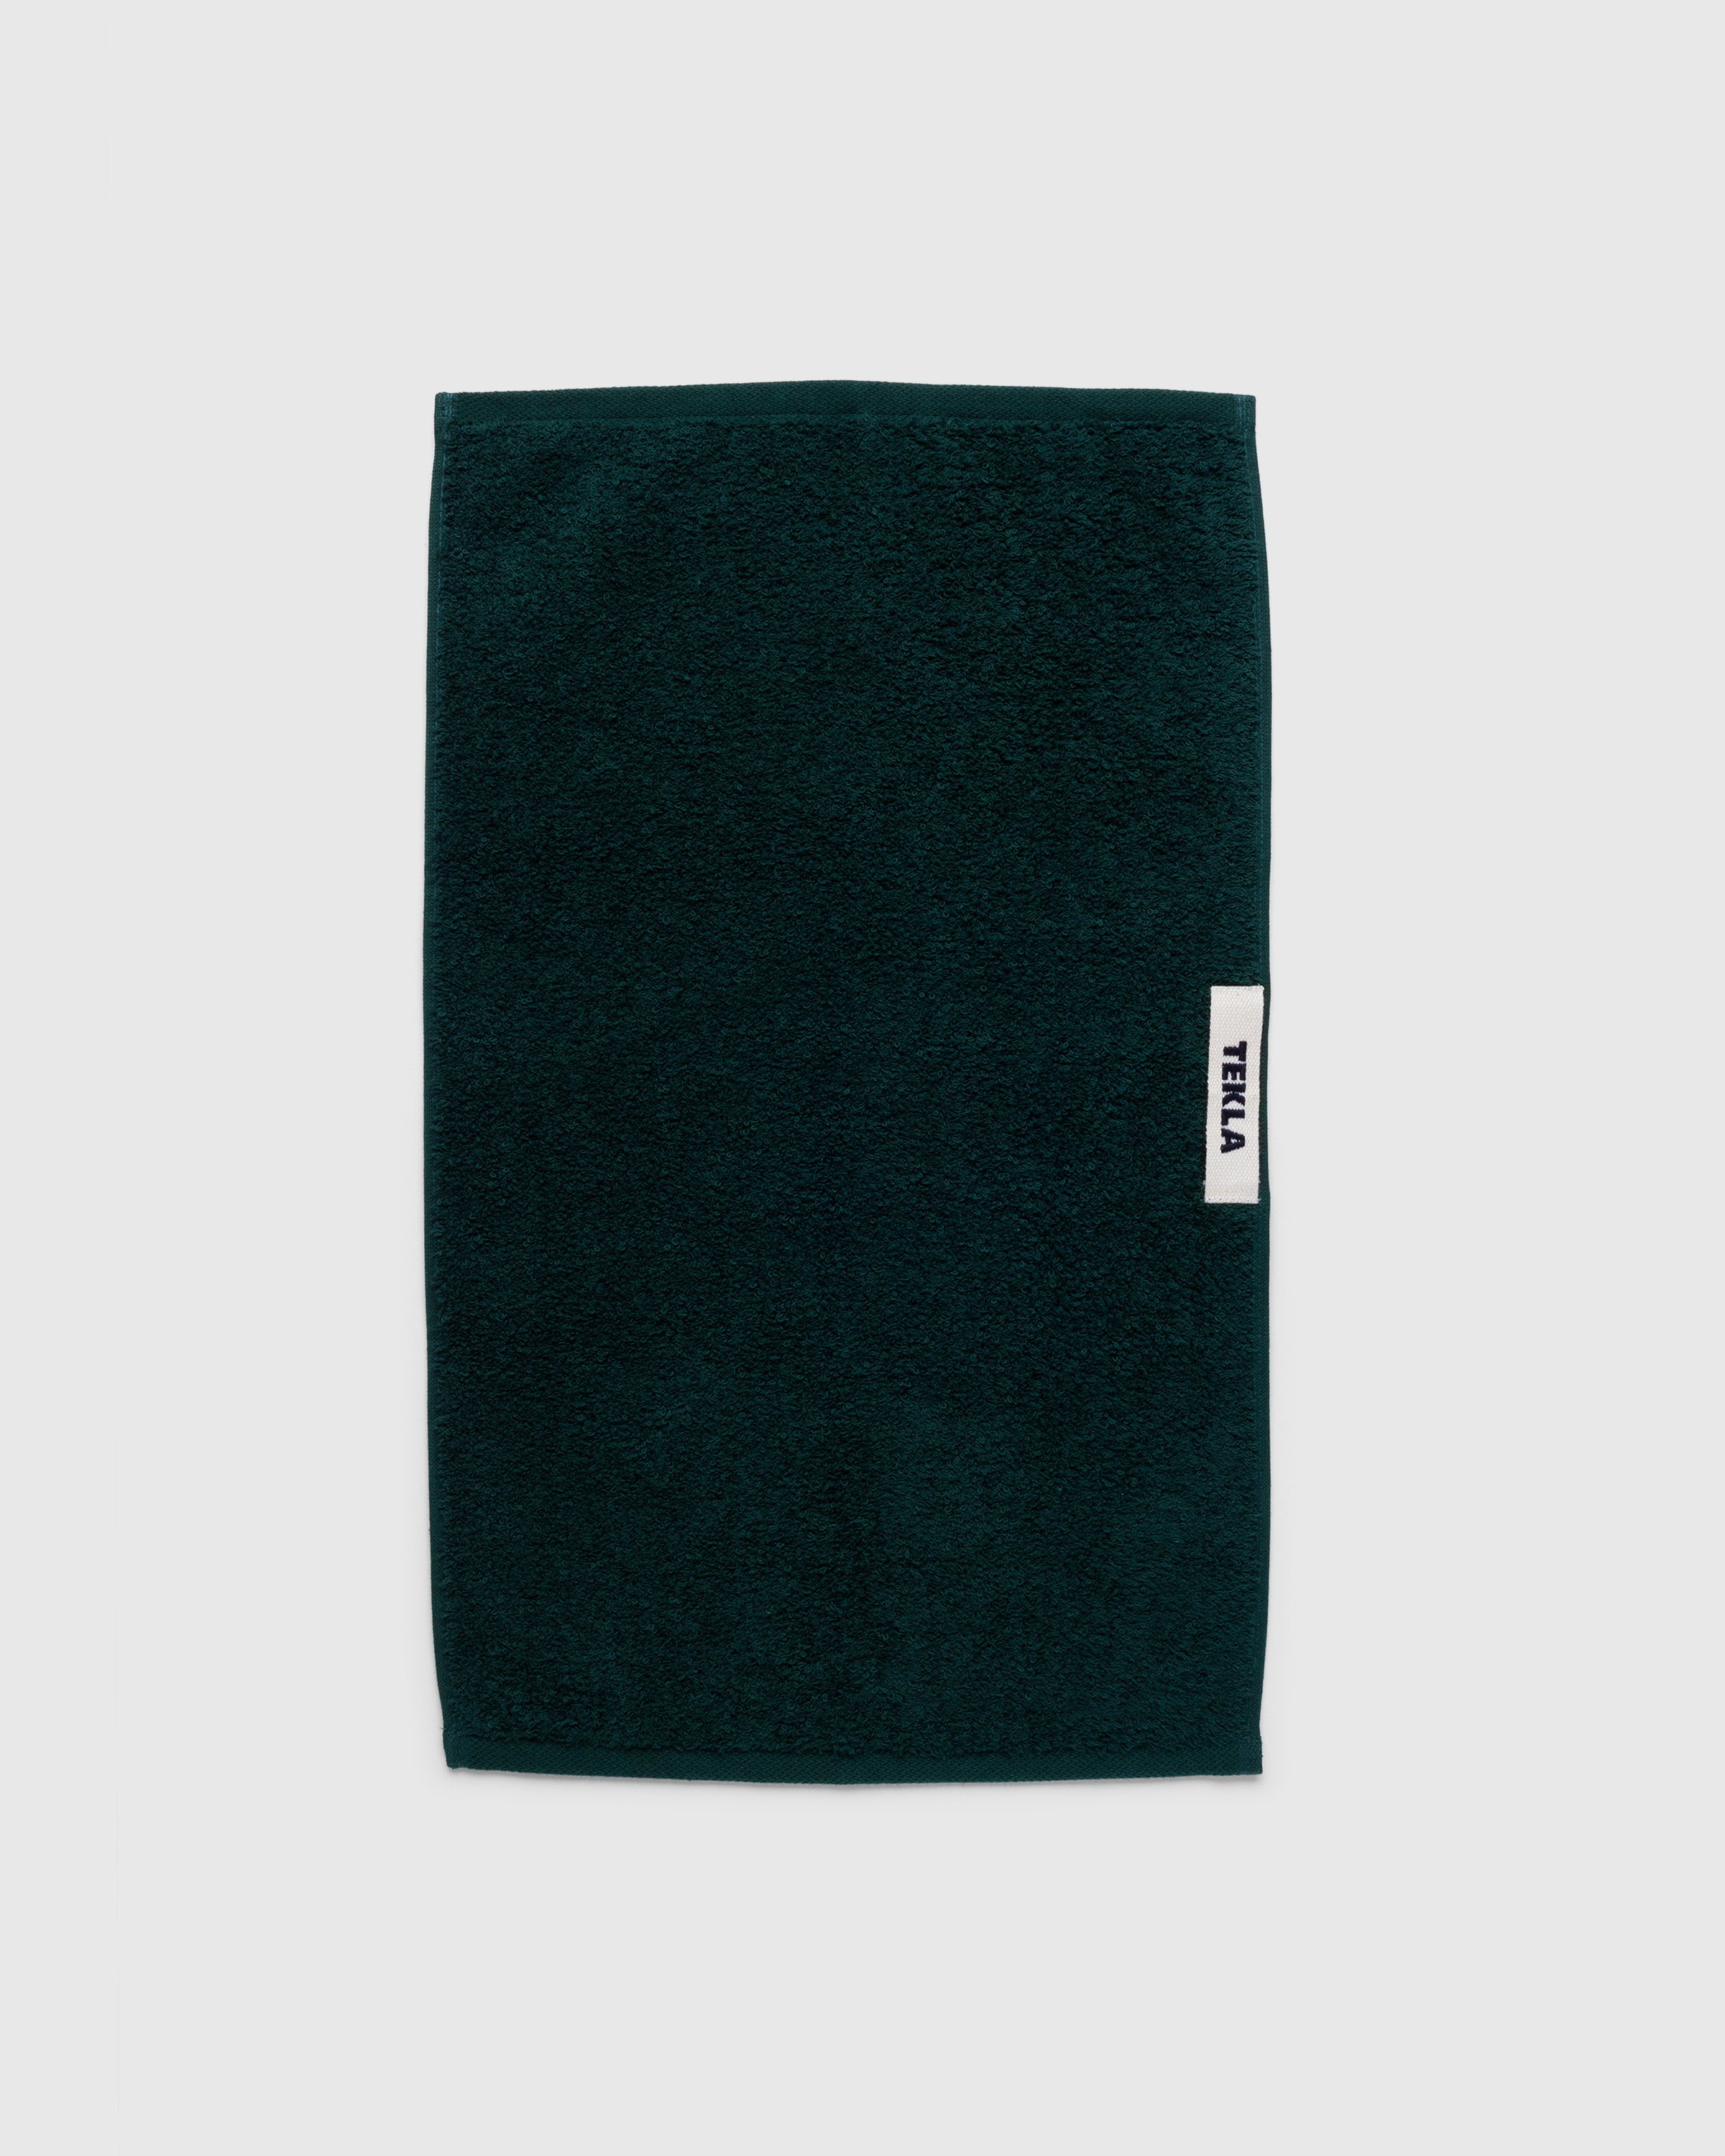 Tekla - Hand Towel Forest Green - Lifestyle - Green - Image 2